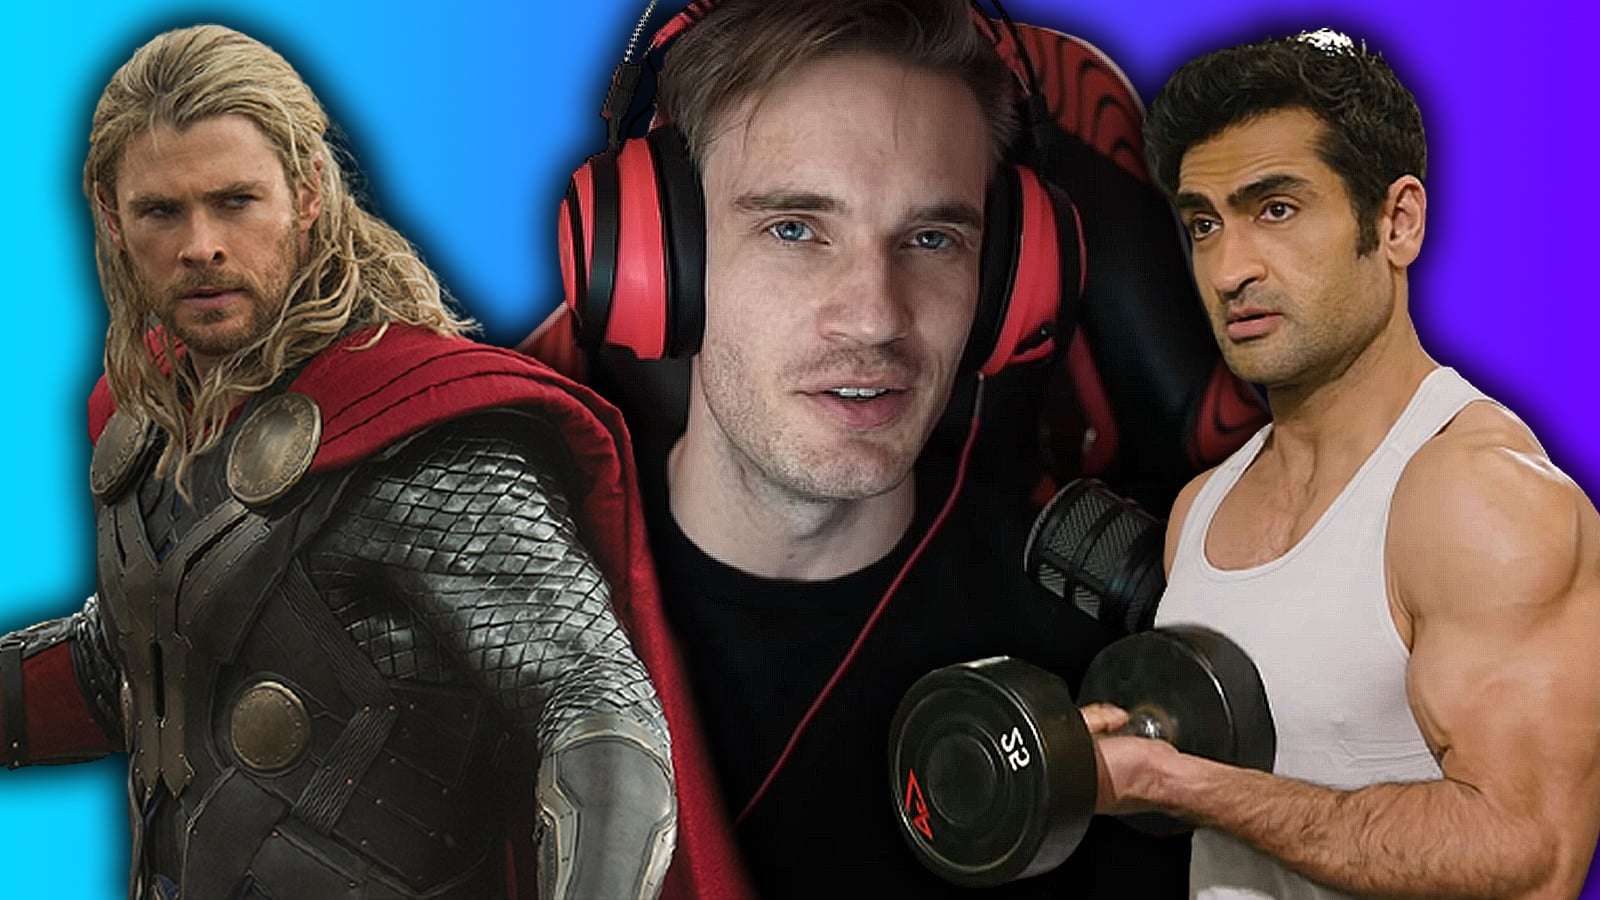 PewDiePie slams Marvel stars for purported steroid use